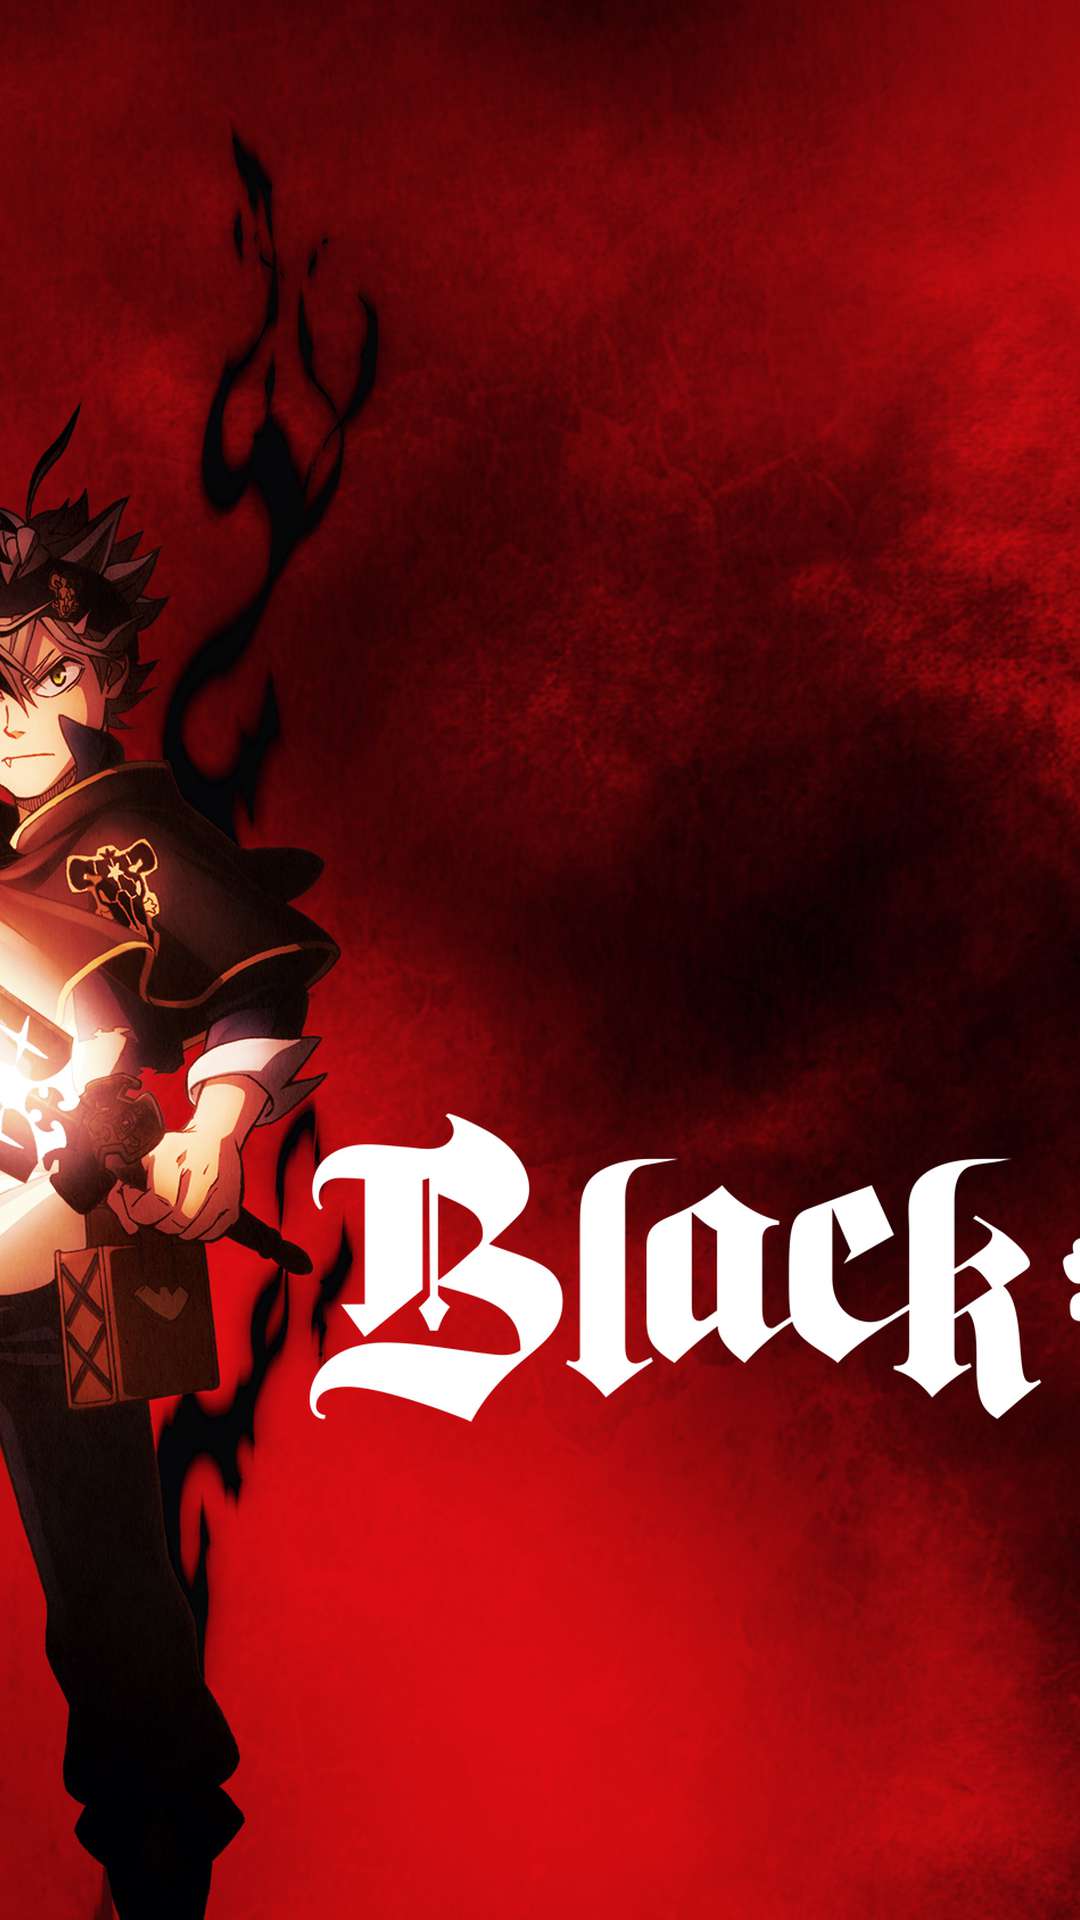 30 Black Clover AppleiPhone X 1125x2436 Wallpapers  Mobile Abyss